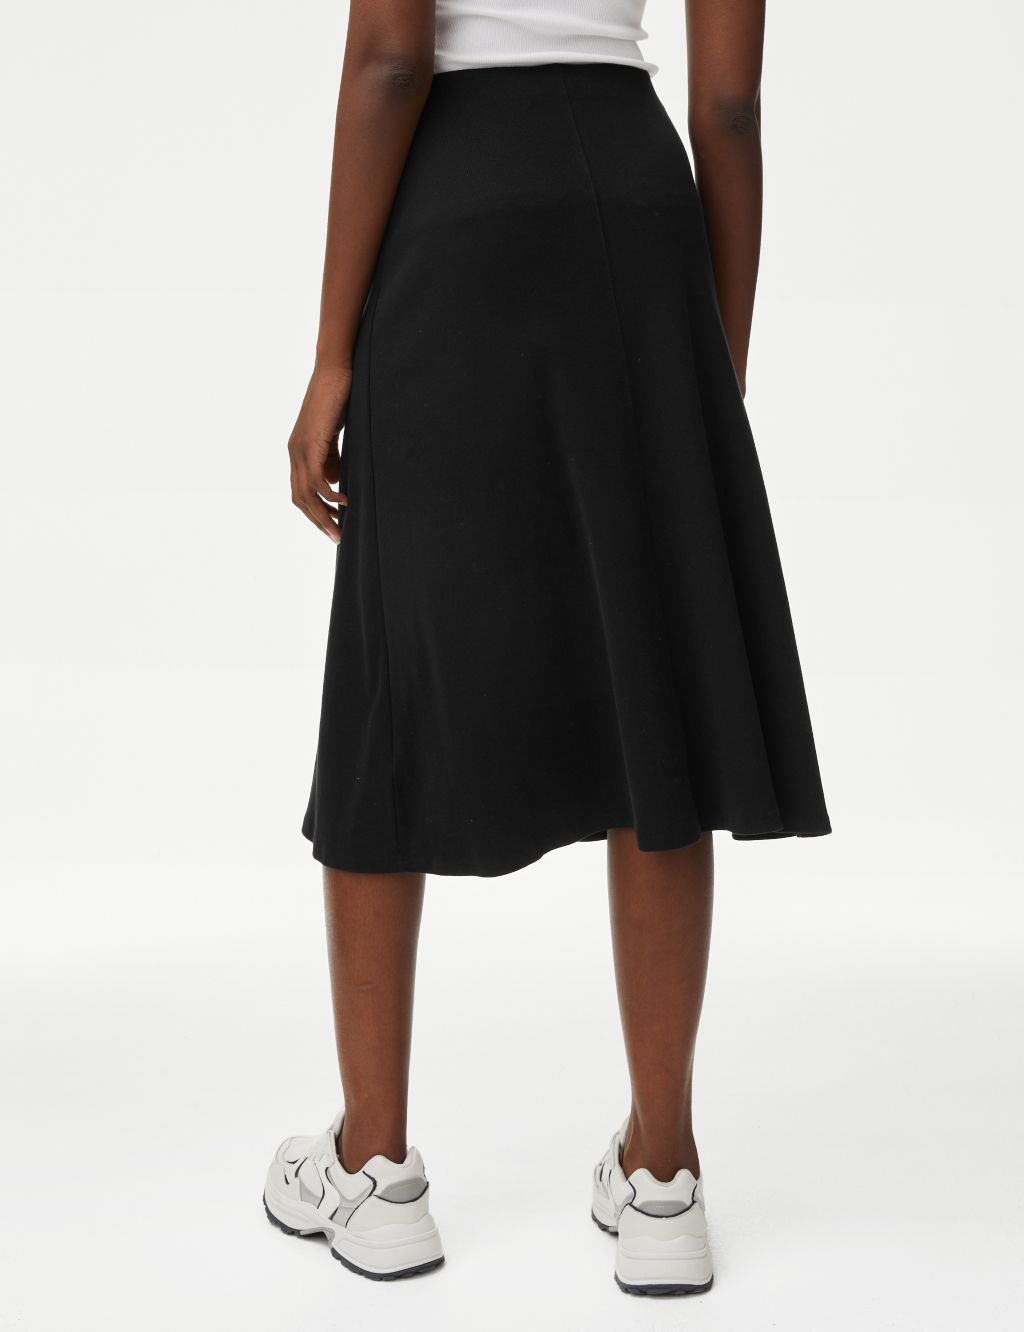 Cotton Rich Ribbed Midi A-Line Skirt image 5